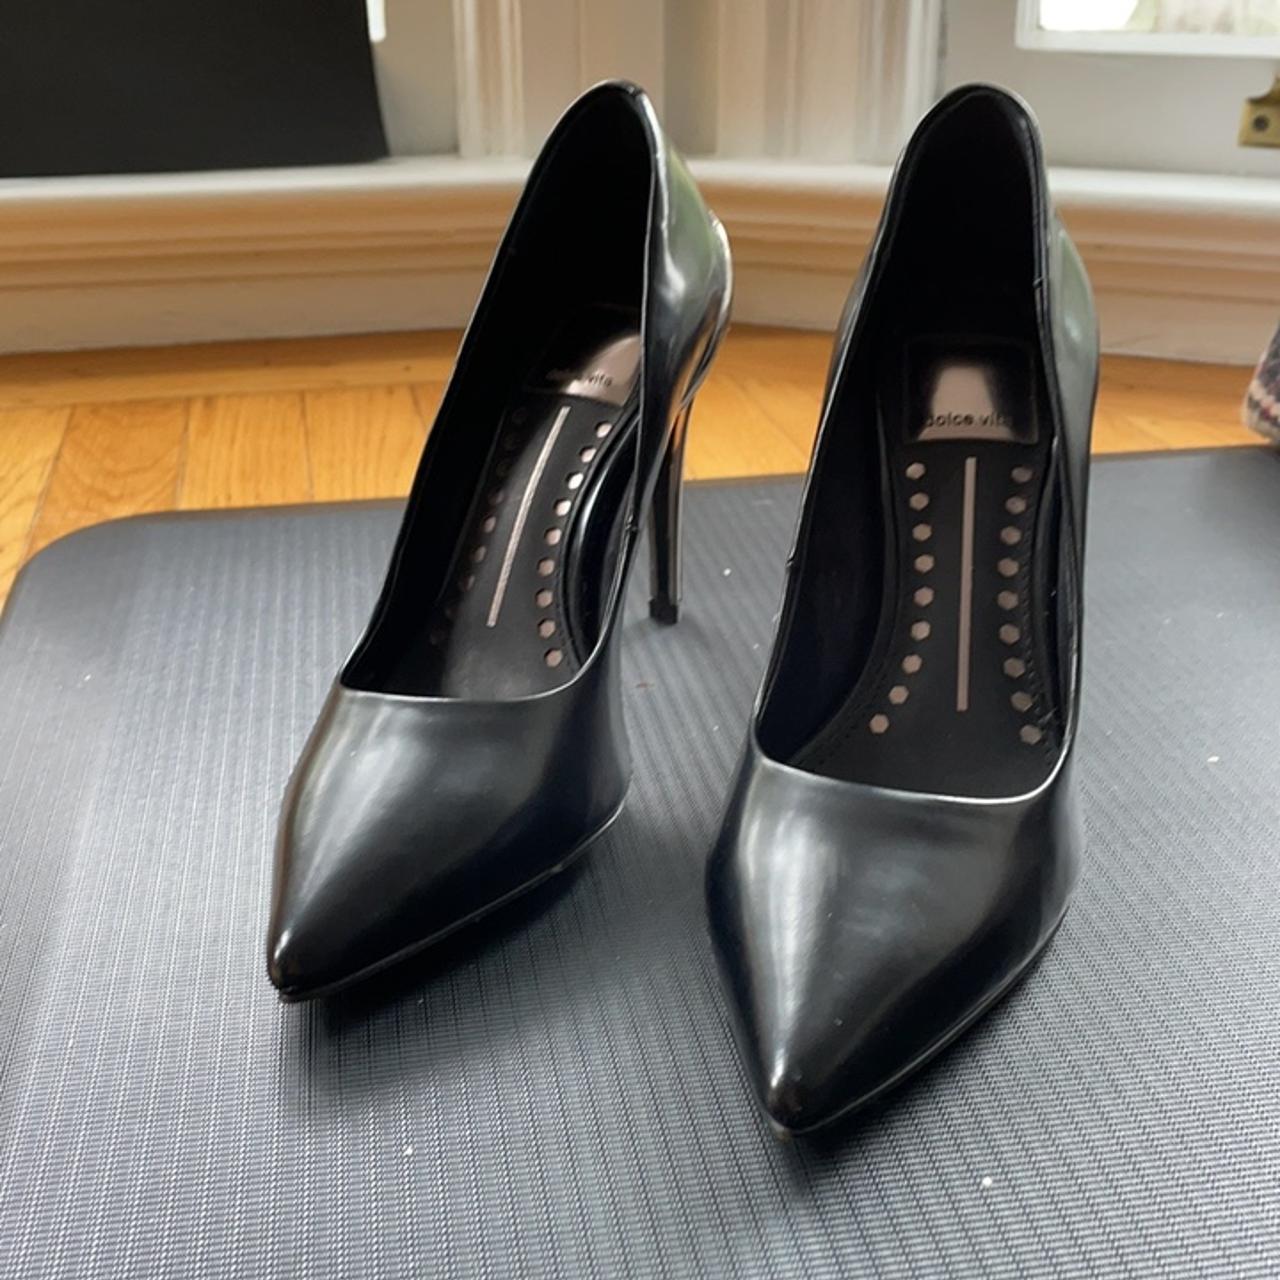 Dolce Vita Women's Black and Silver Courts (2)